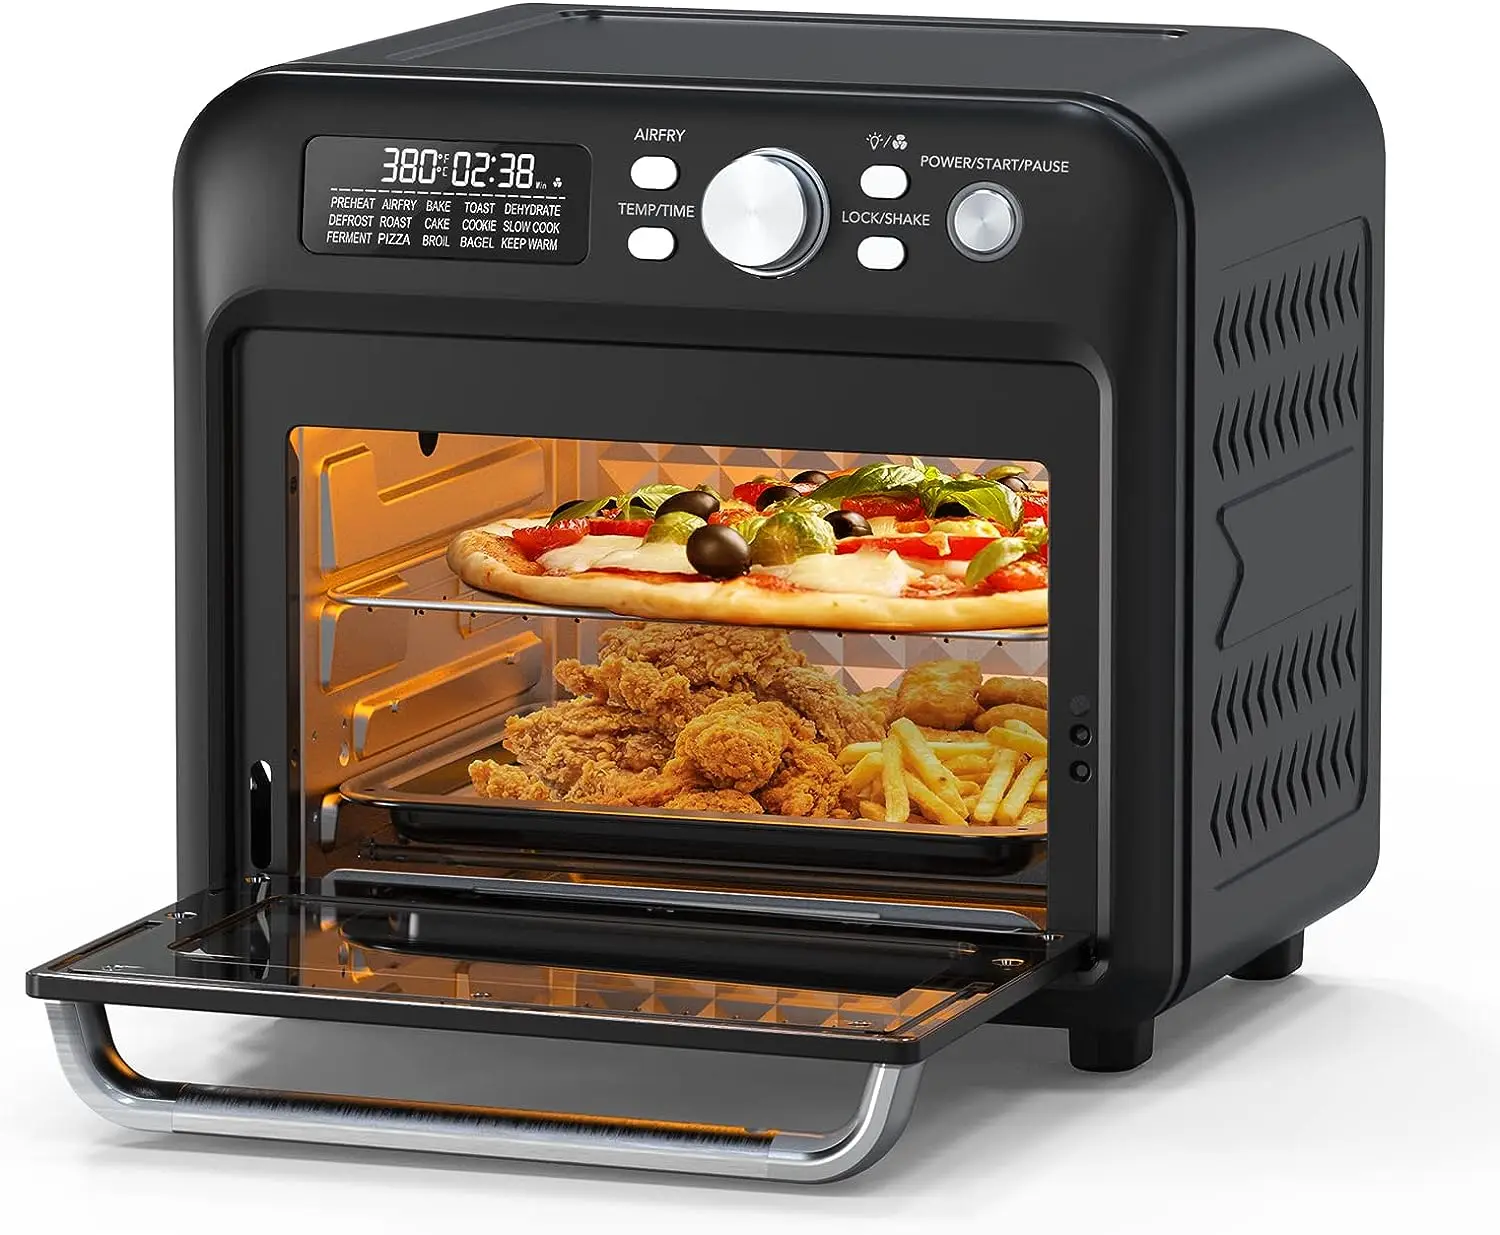 

Fryer Oven, 15-in-1 Family-Sized Toaster Oven, 19 QT Convection Oven with Child Lock, Fits 10-inch Pizza, 6-Slice Toast, Button